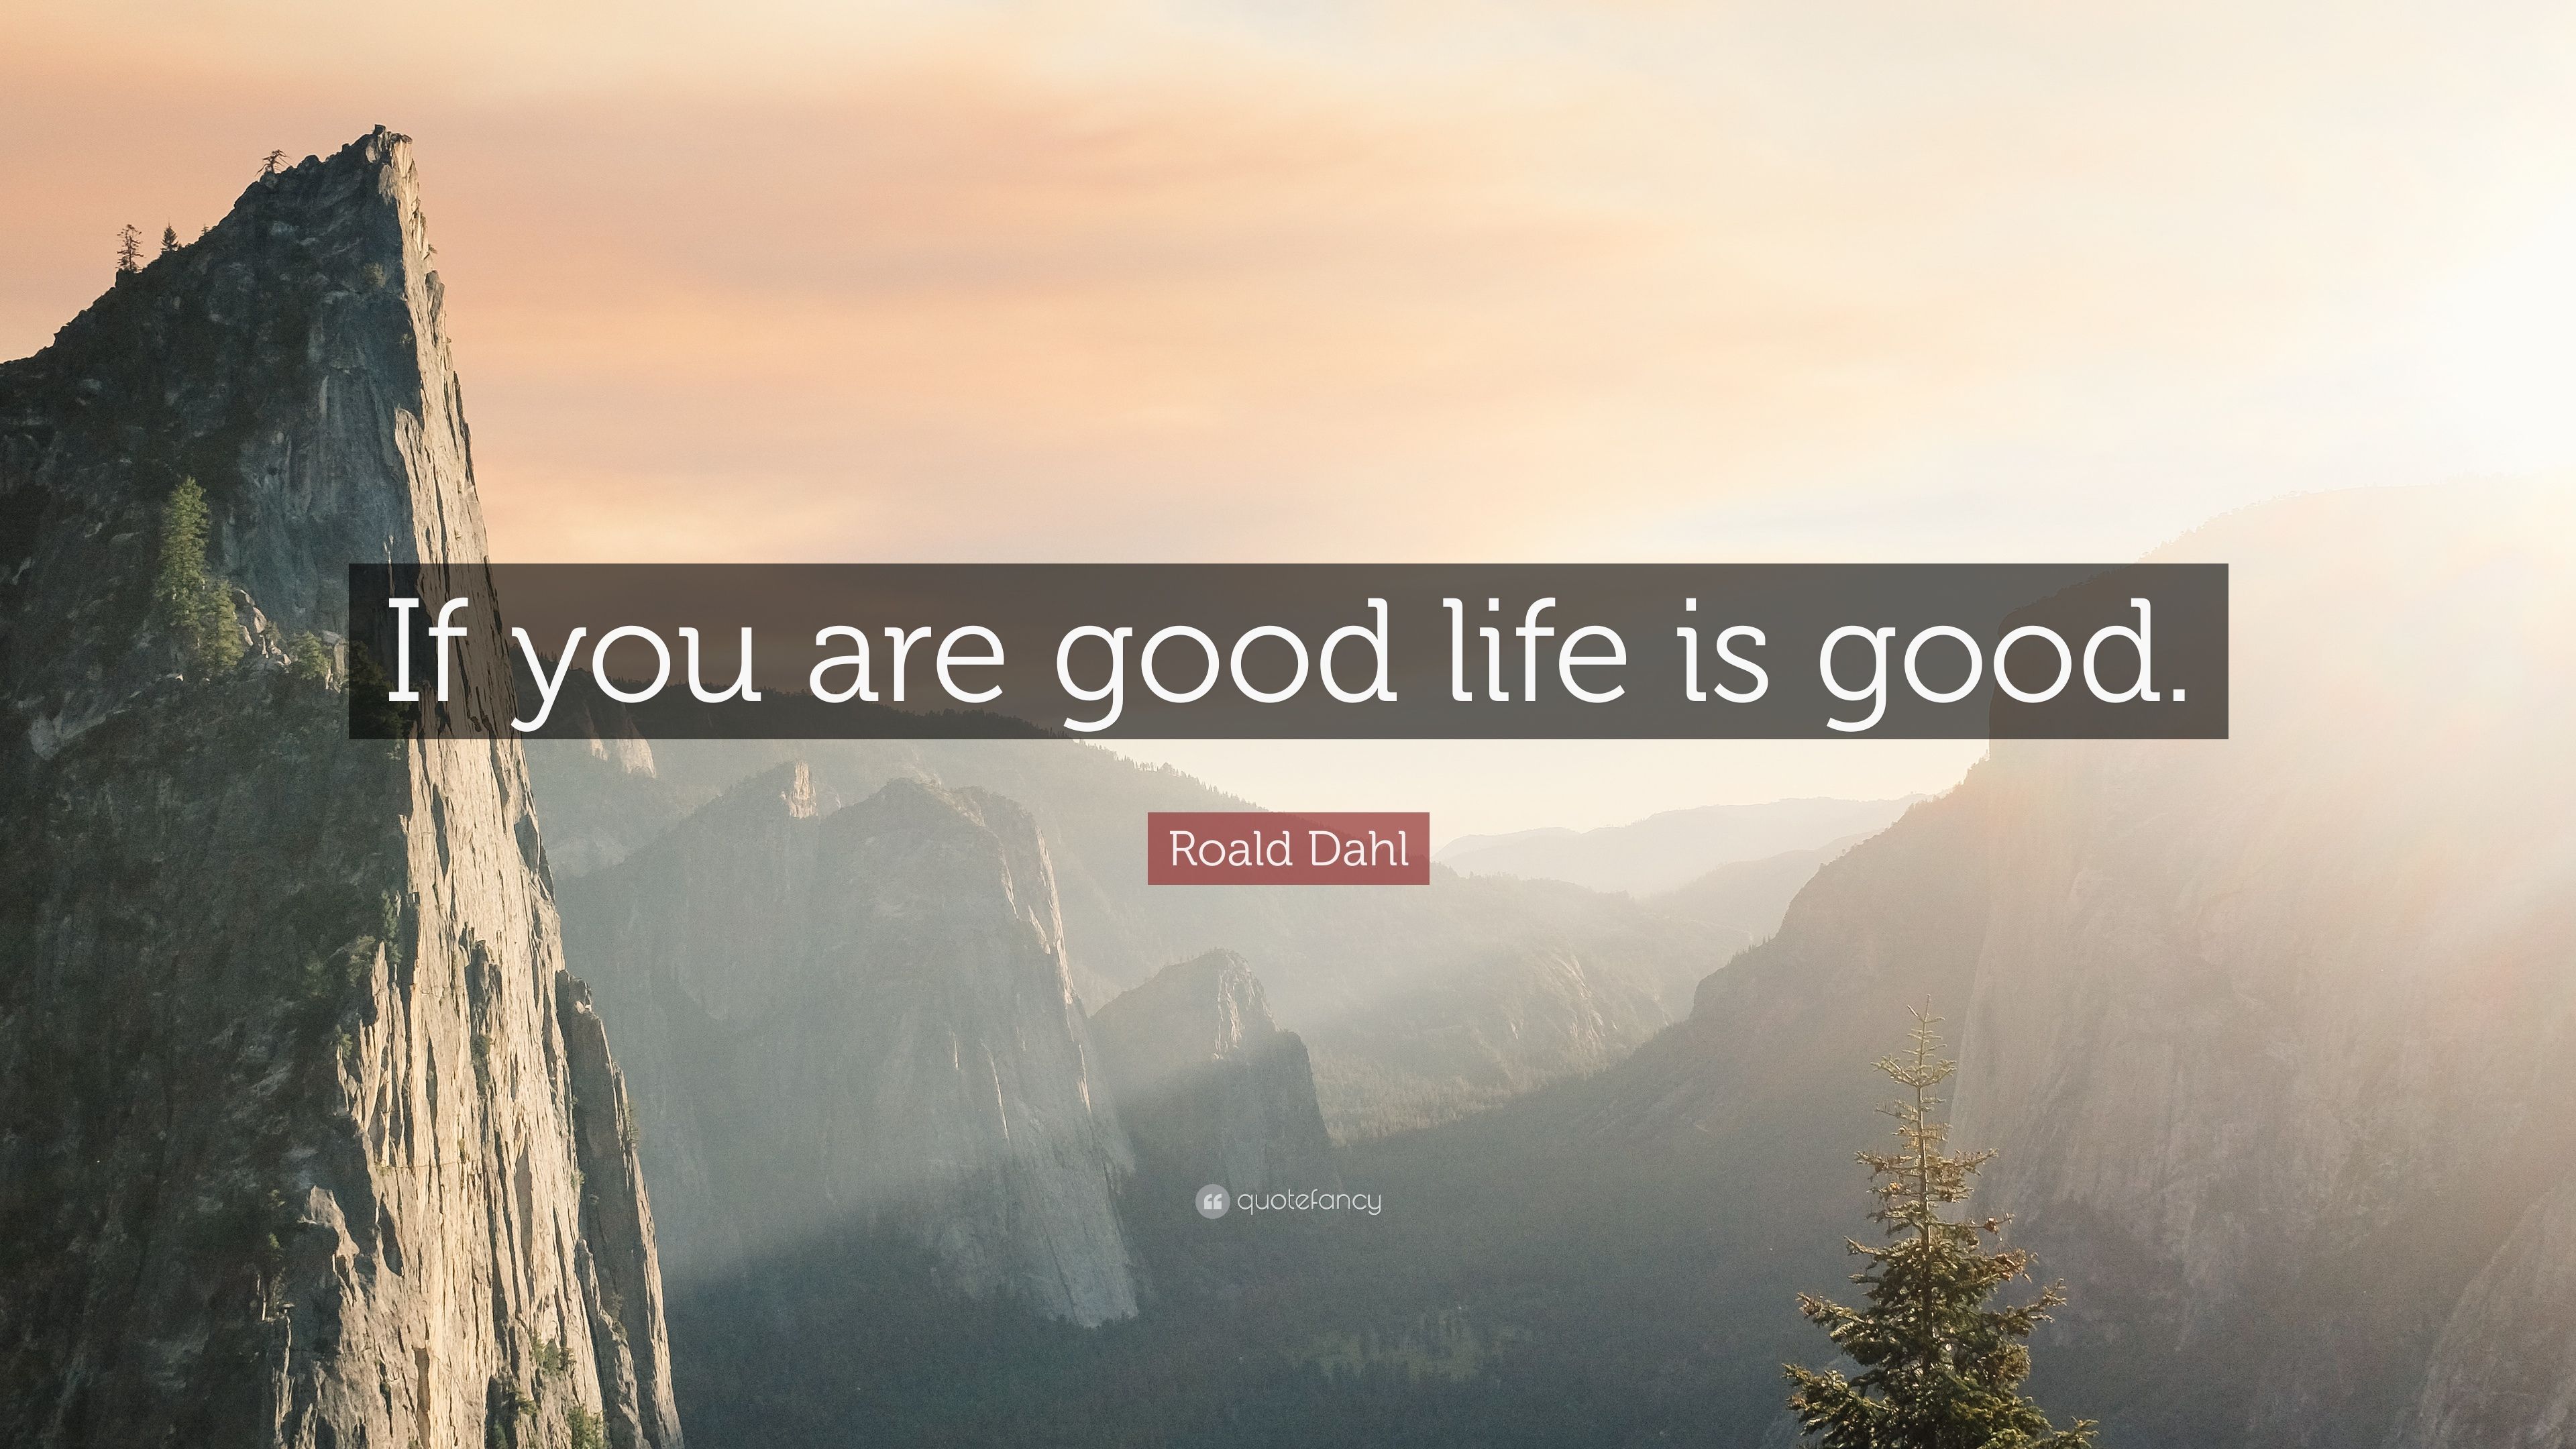 3840x2160 Roald Dahl Quote: "If you are good life is good." 